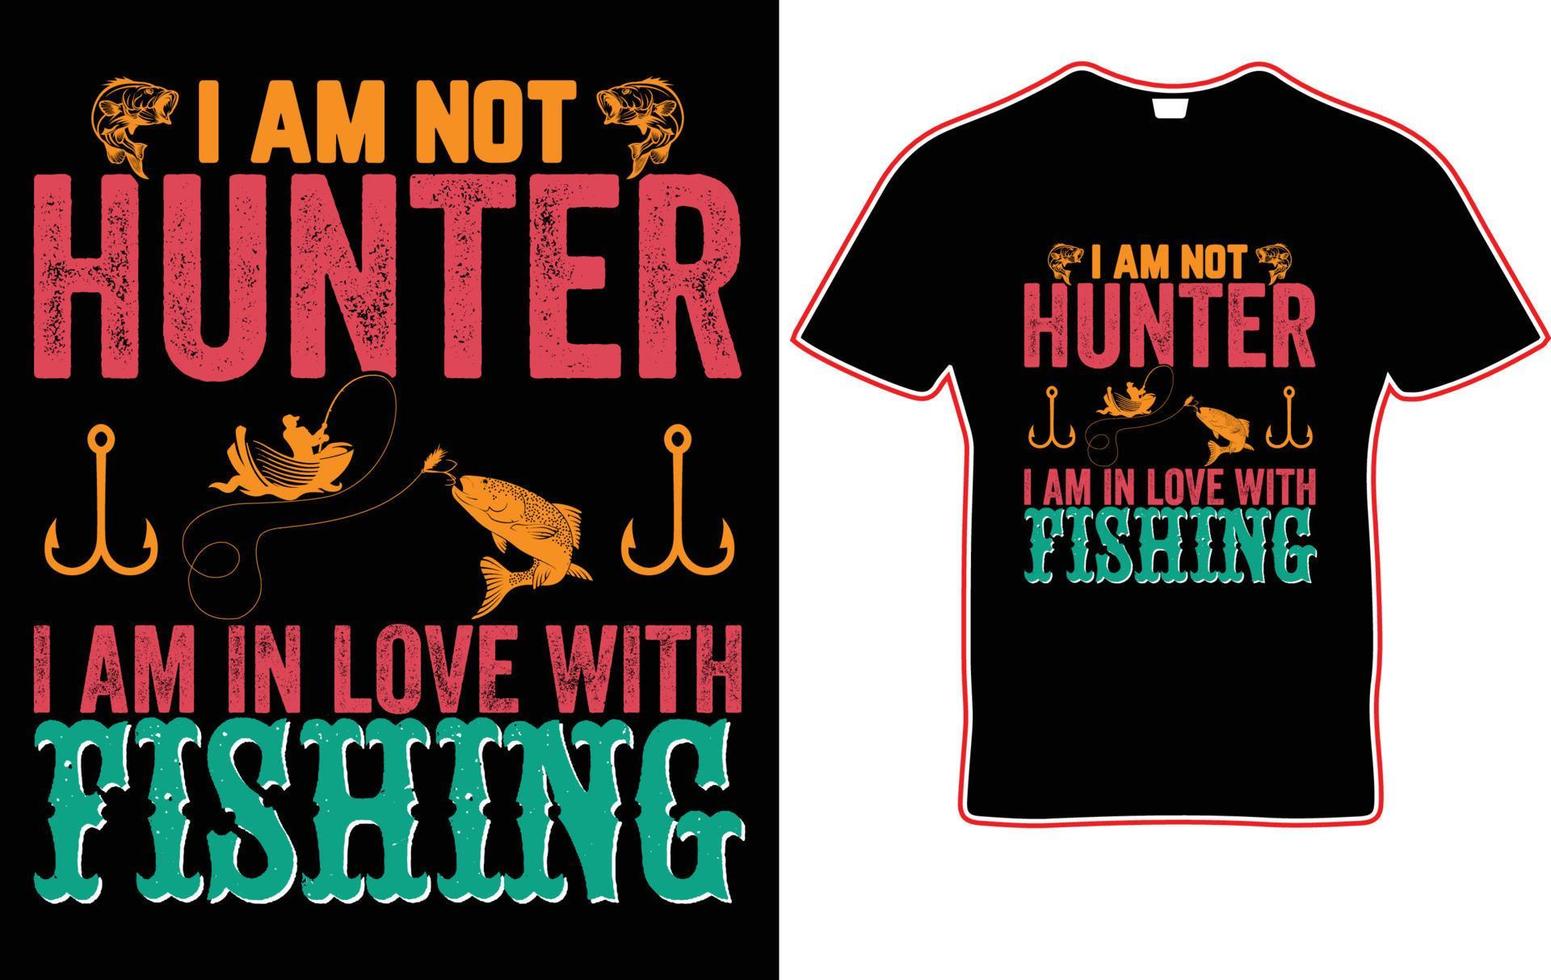 I am not hunter I am in love with fishing t shirt design. fishing t shirt design. vector